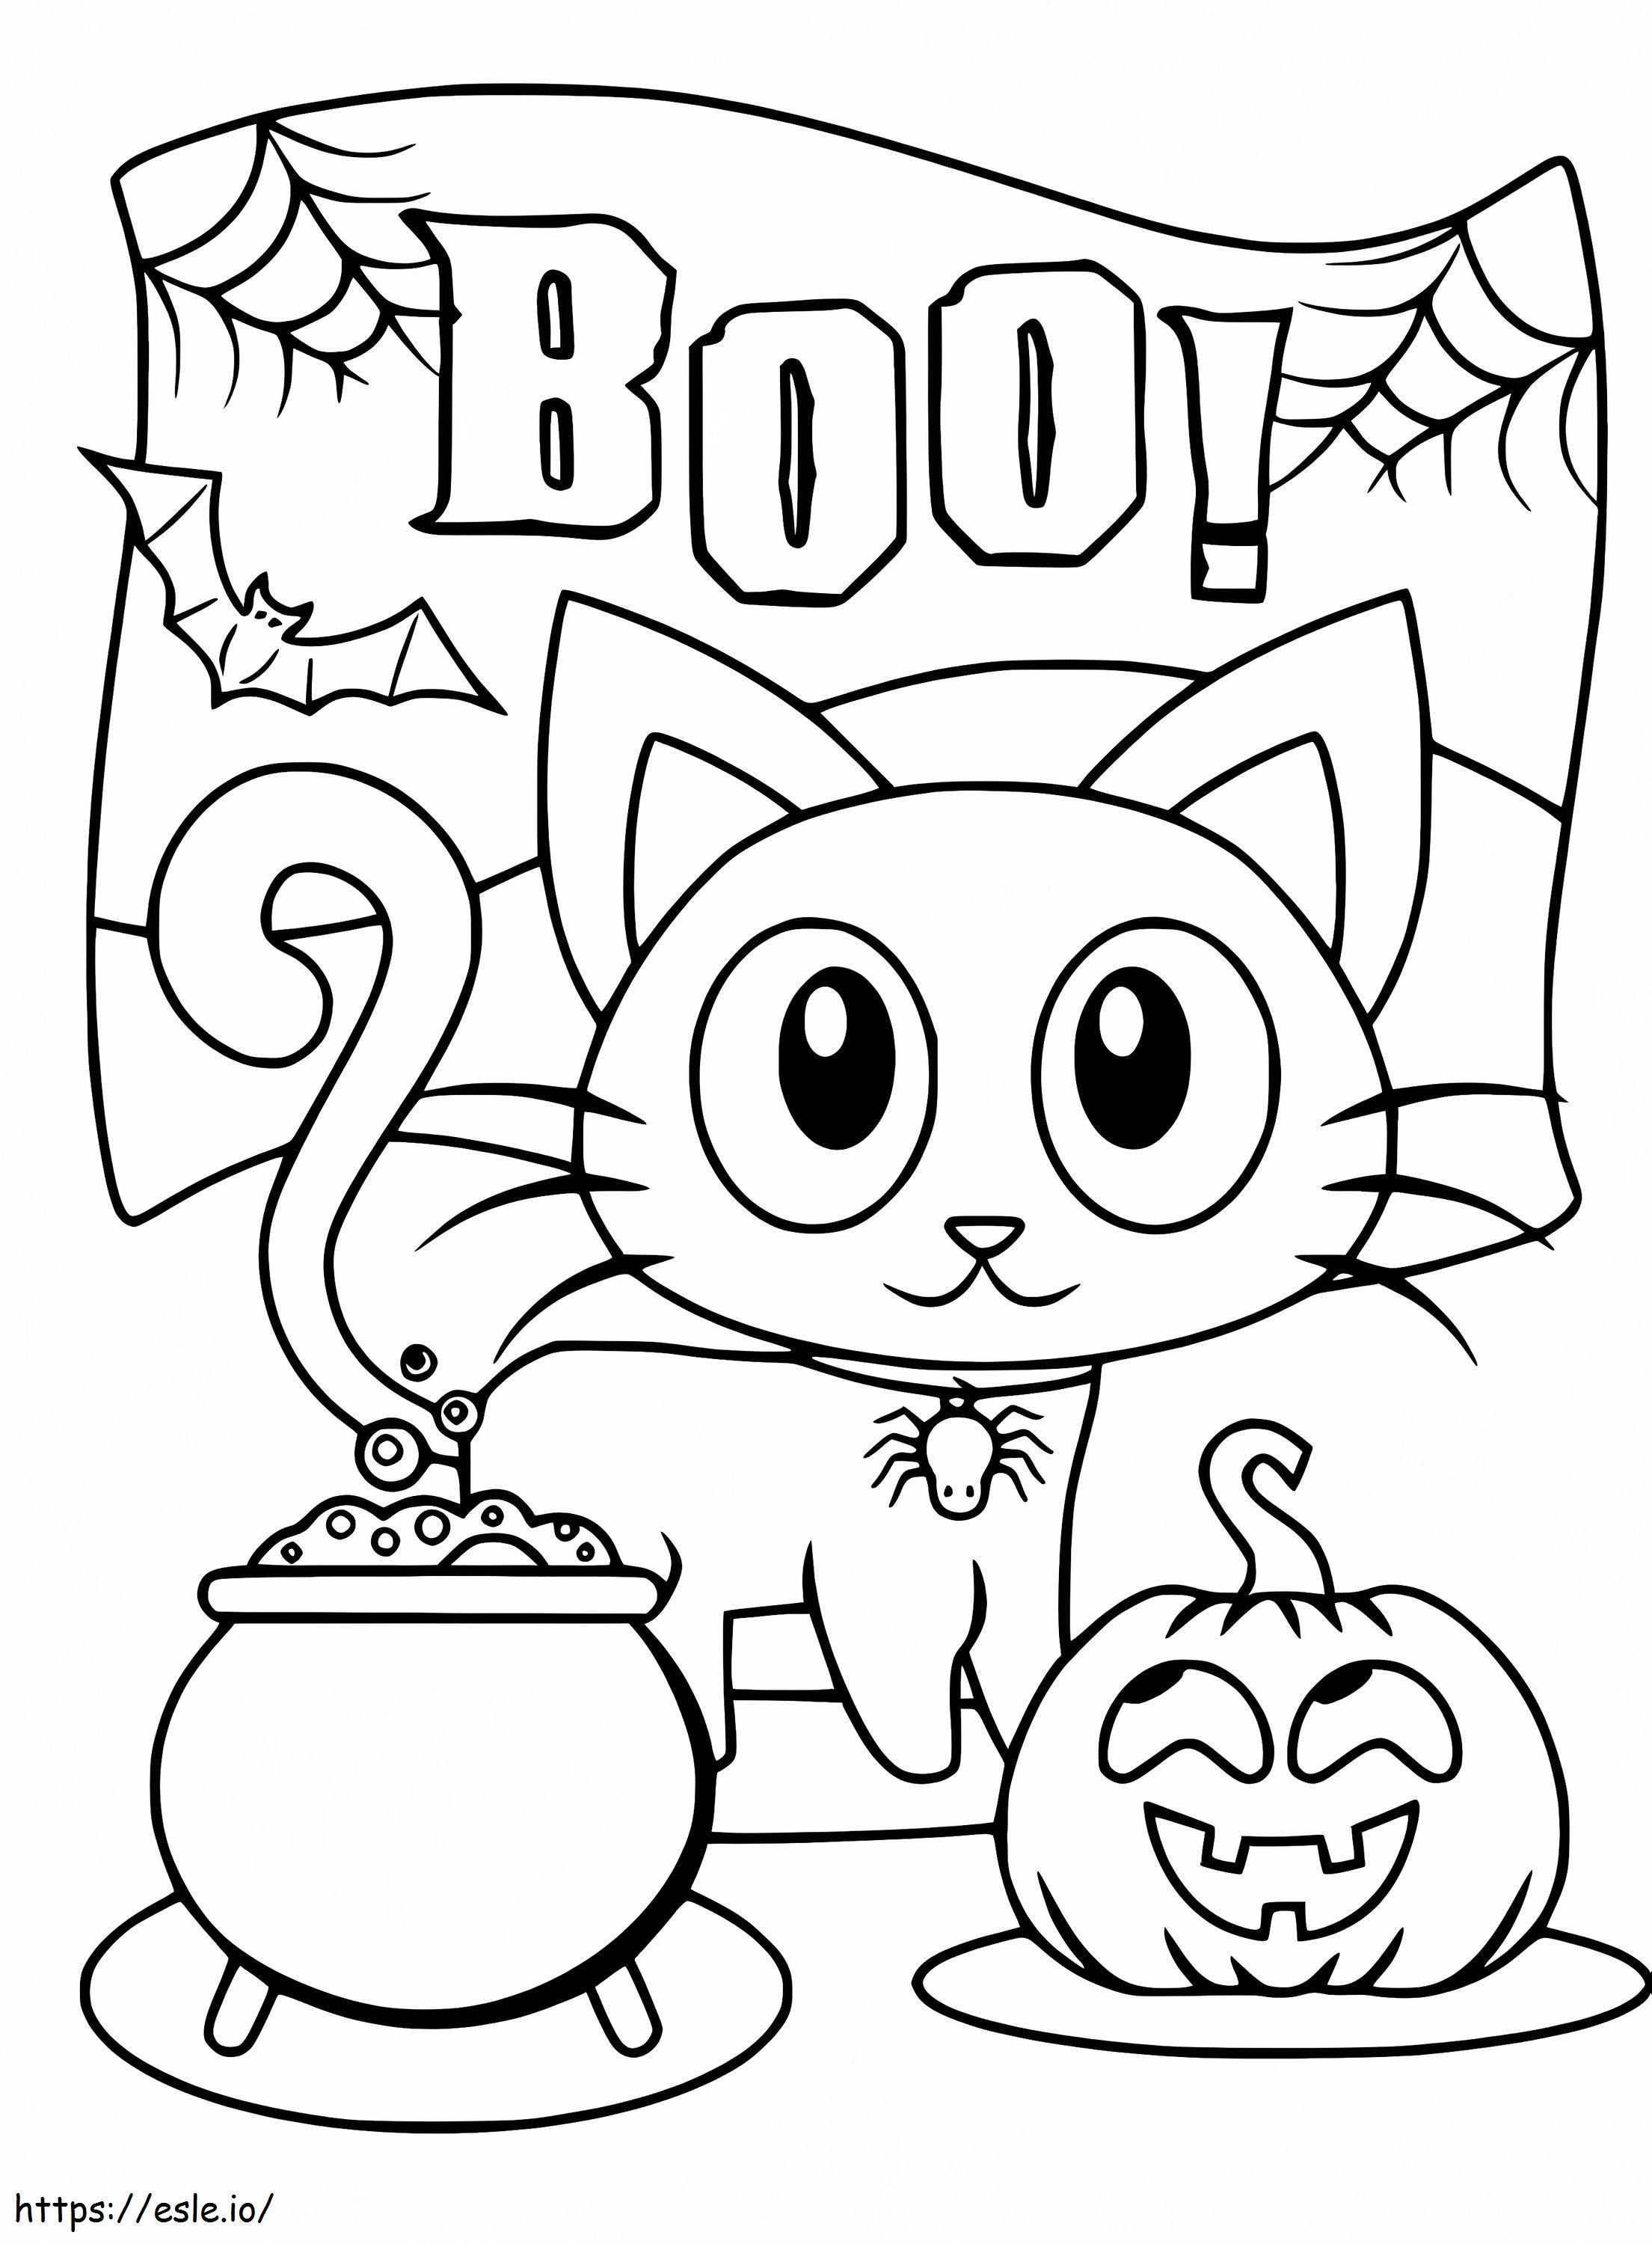 Halween Cat 9 coloring page